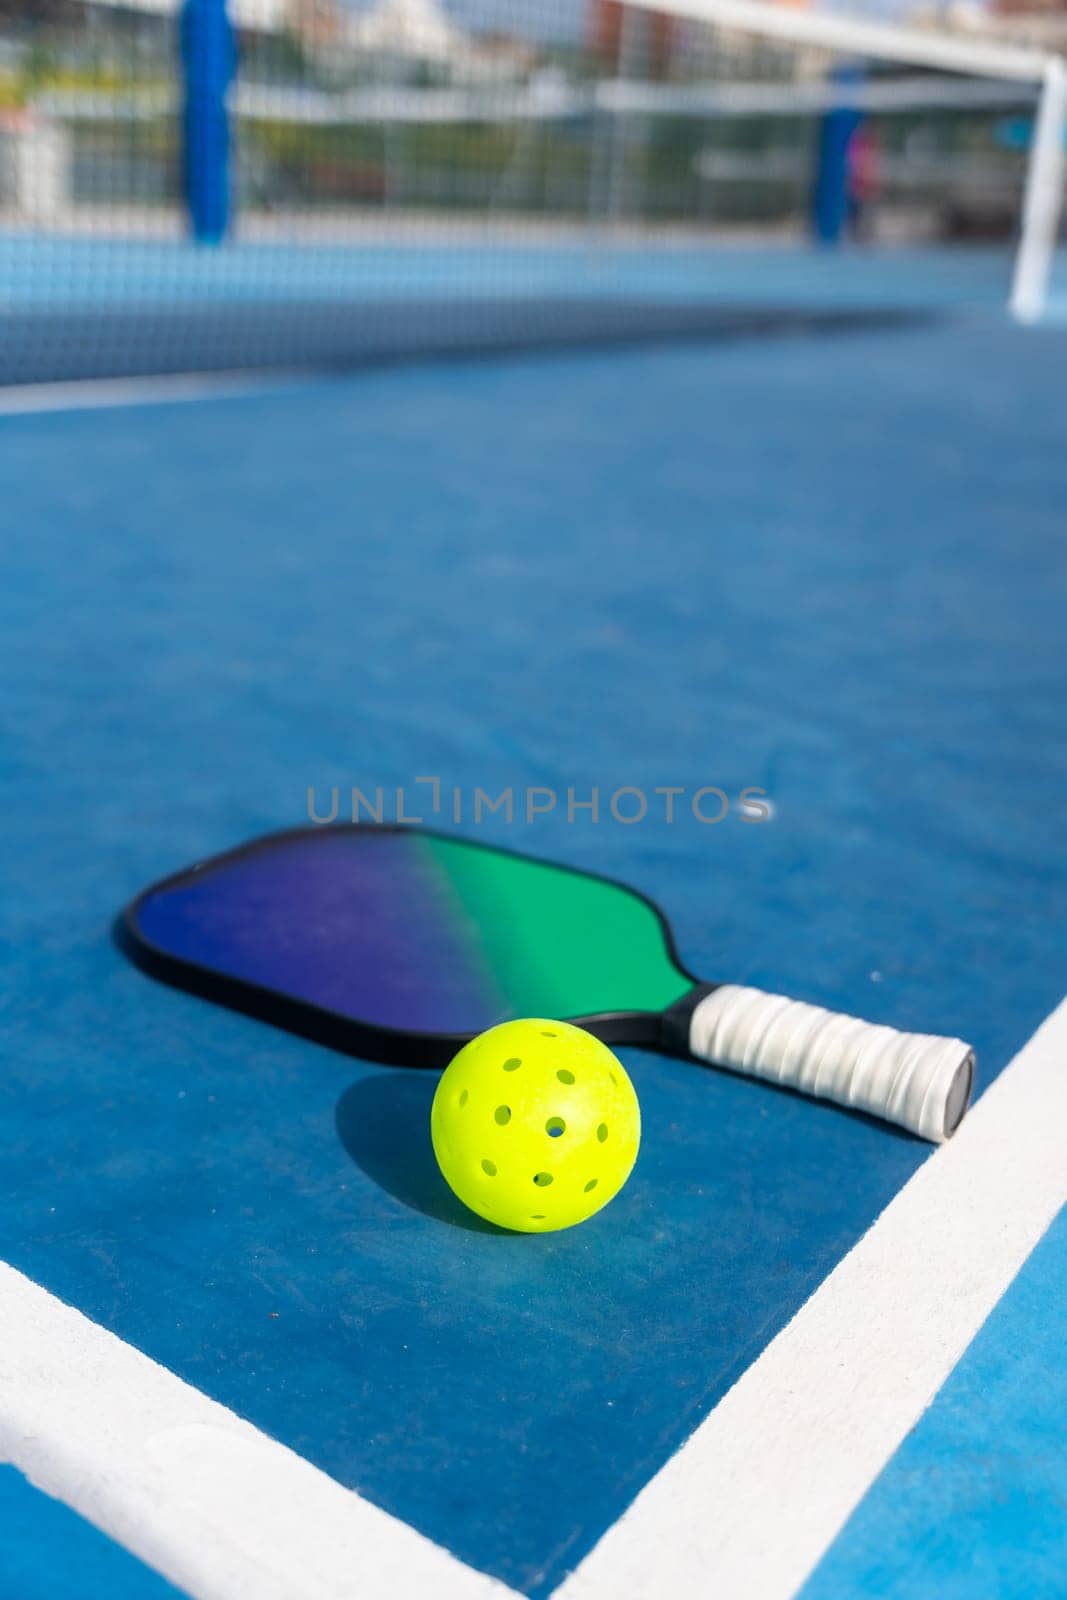 Racket and pickleball ball placed on a court ground by Huizi